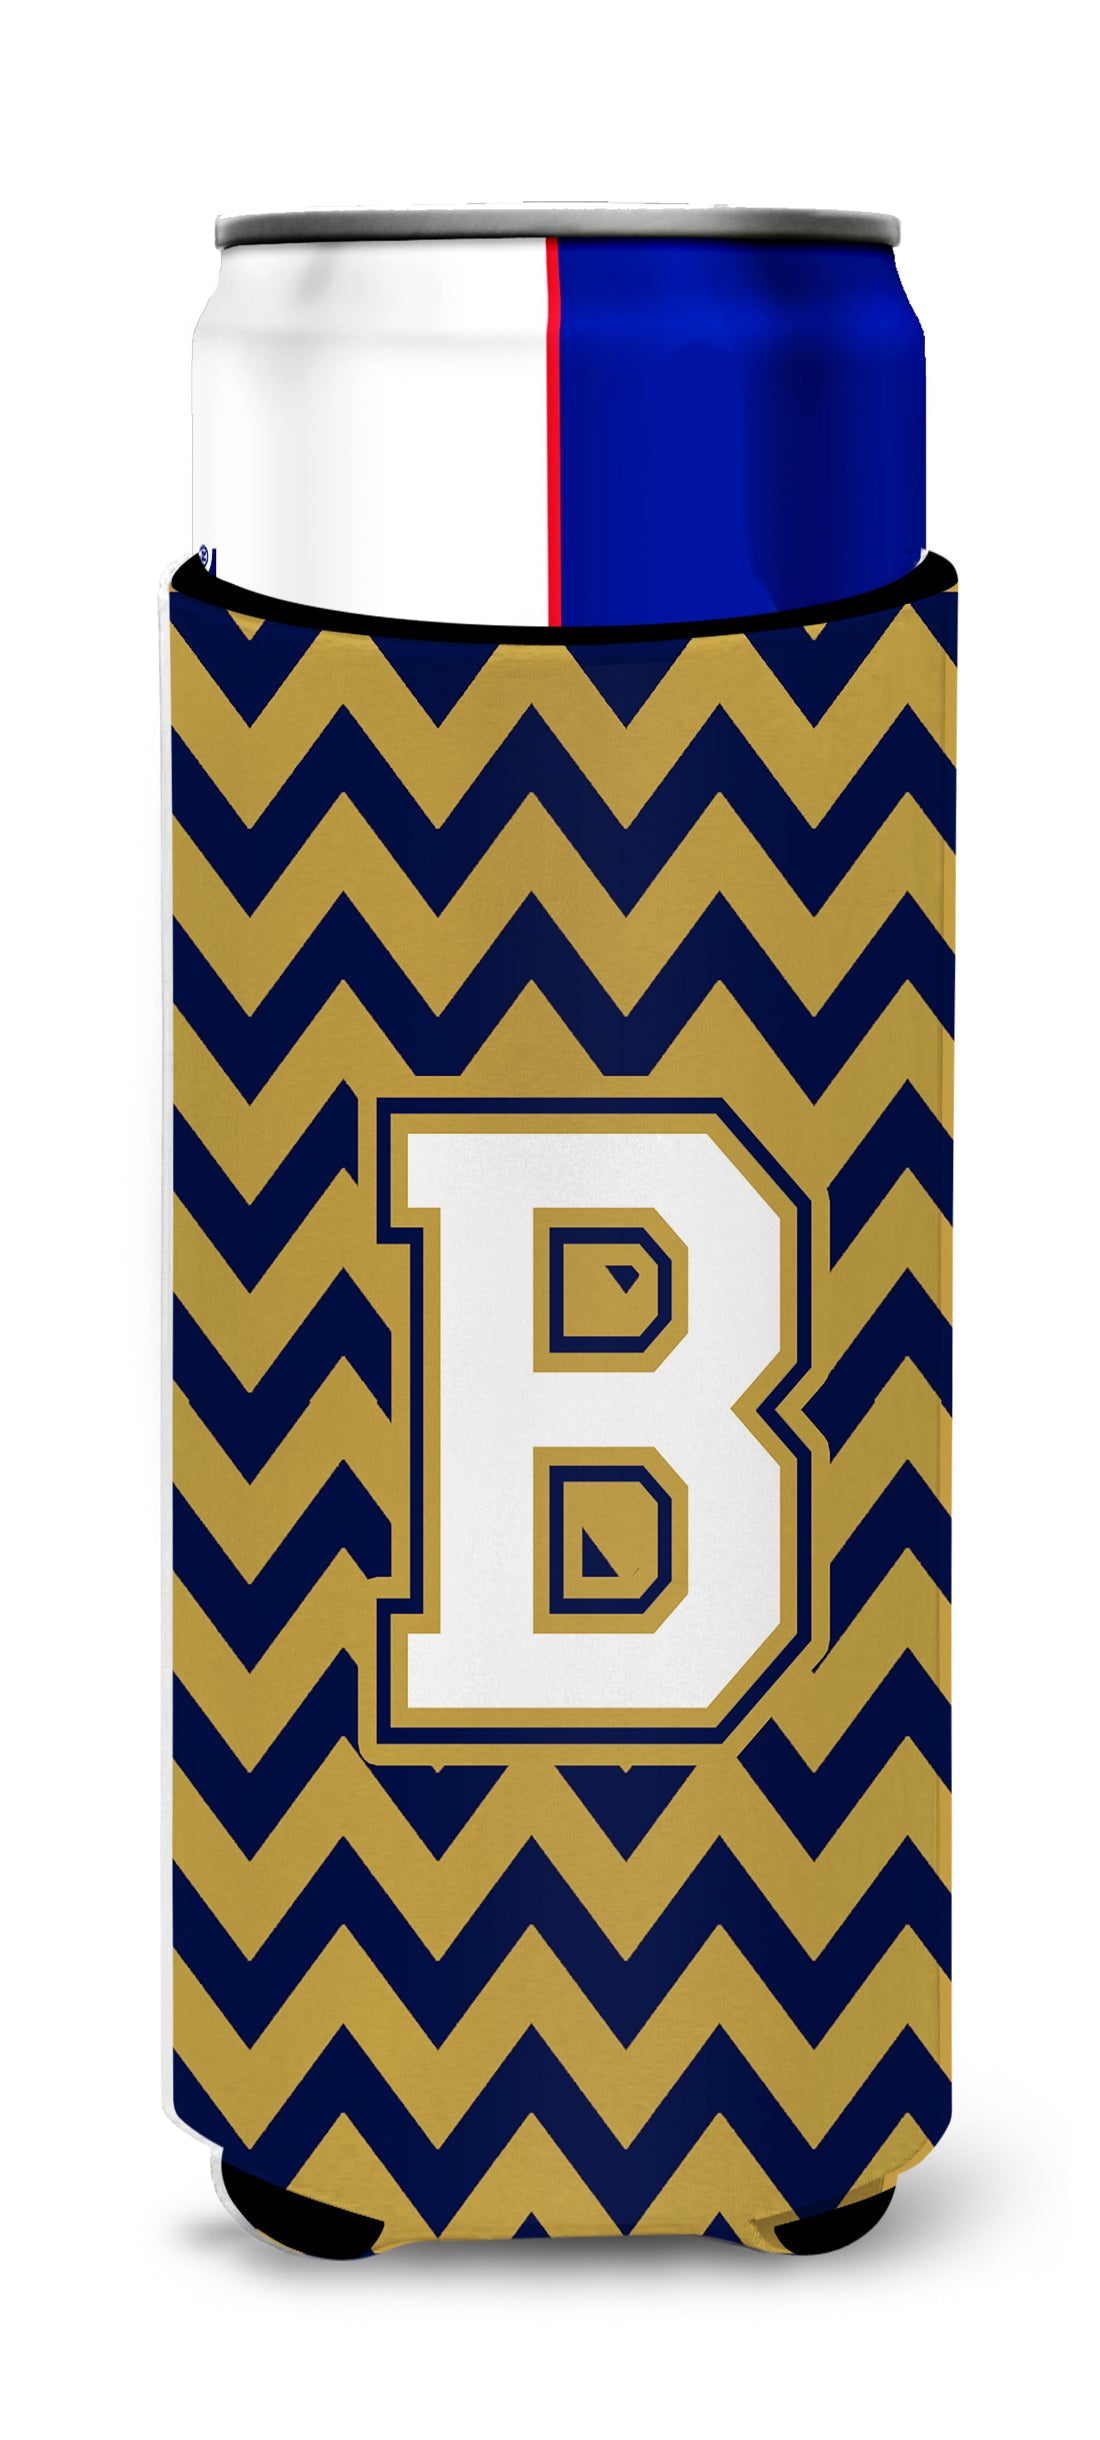 Letter B Chevron Navy Blue and Gold Ultra Beverage Insulators for slim cans CJ1057-BMUK.